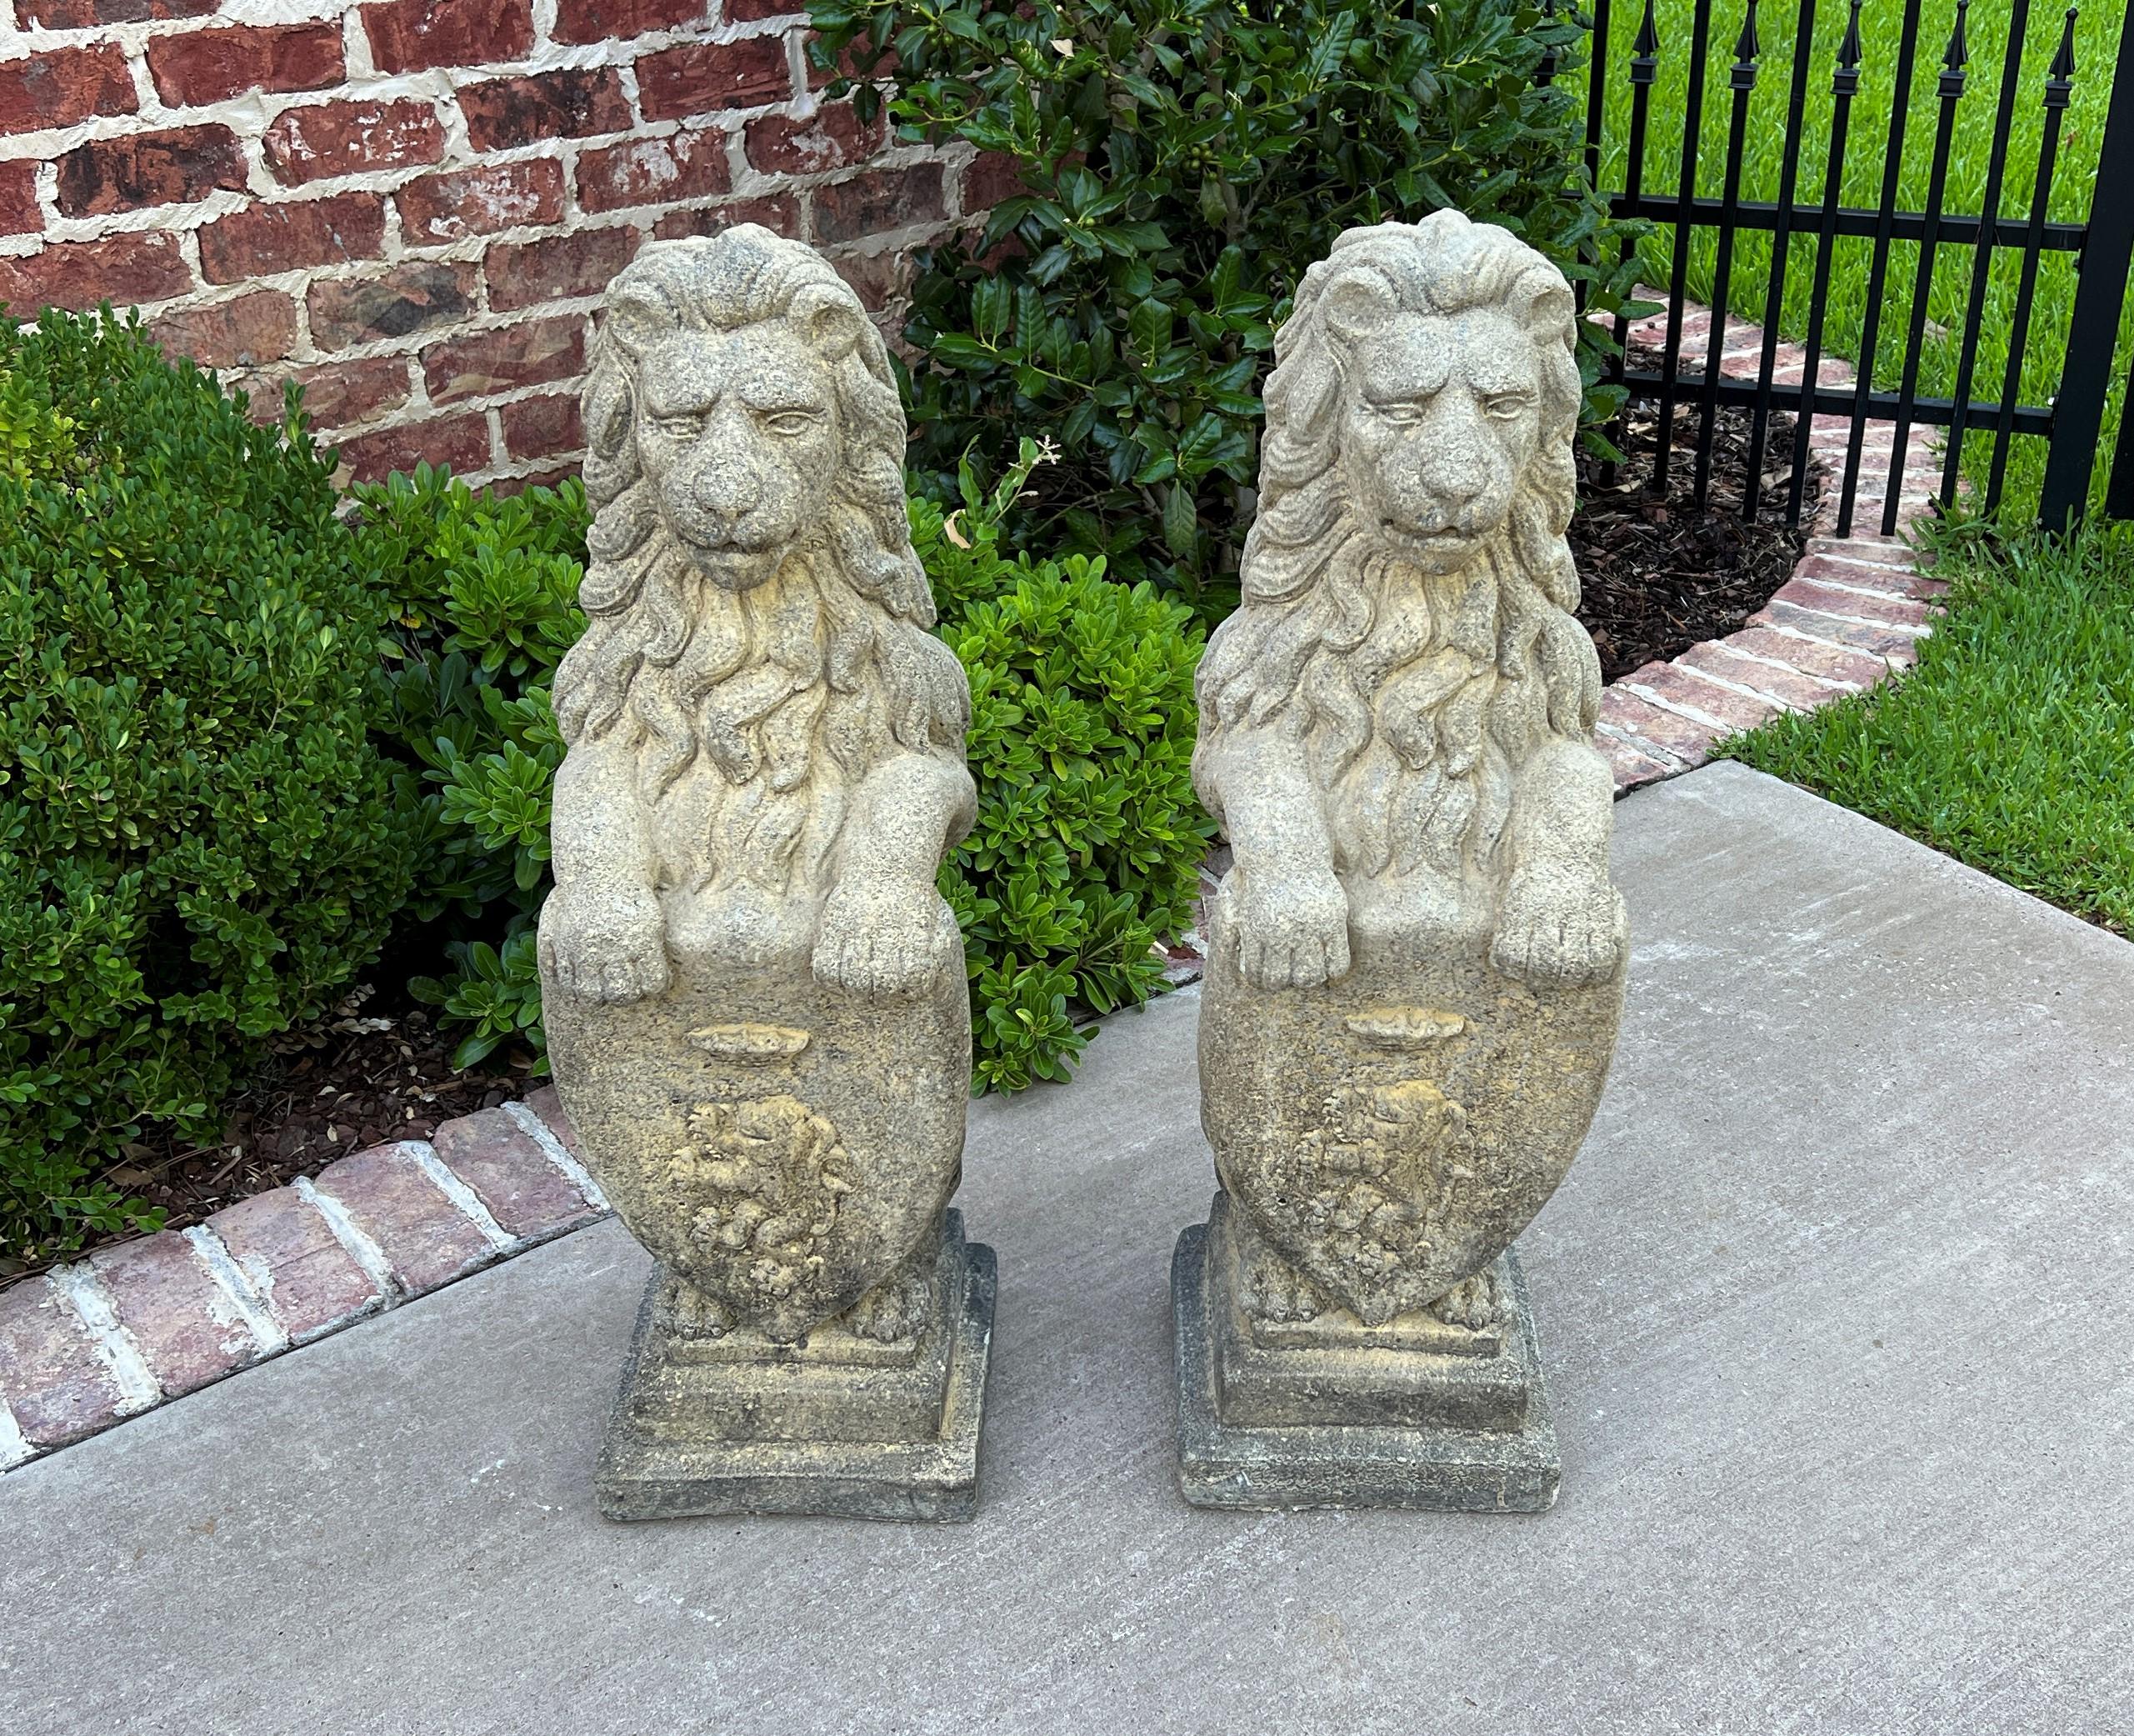 Vintage pair English cast stone lions with heraldic shield statues~~garden figures~~statuary~~architectural yard decor

Original aged patina

 The perfect accent piece or focal point in an entryway, garden, yard, flower bed, or sunroom 

 Each